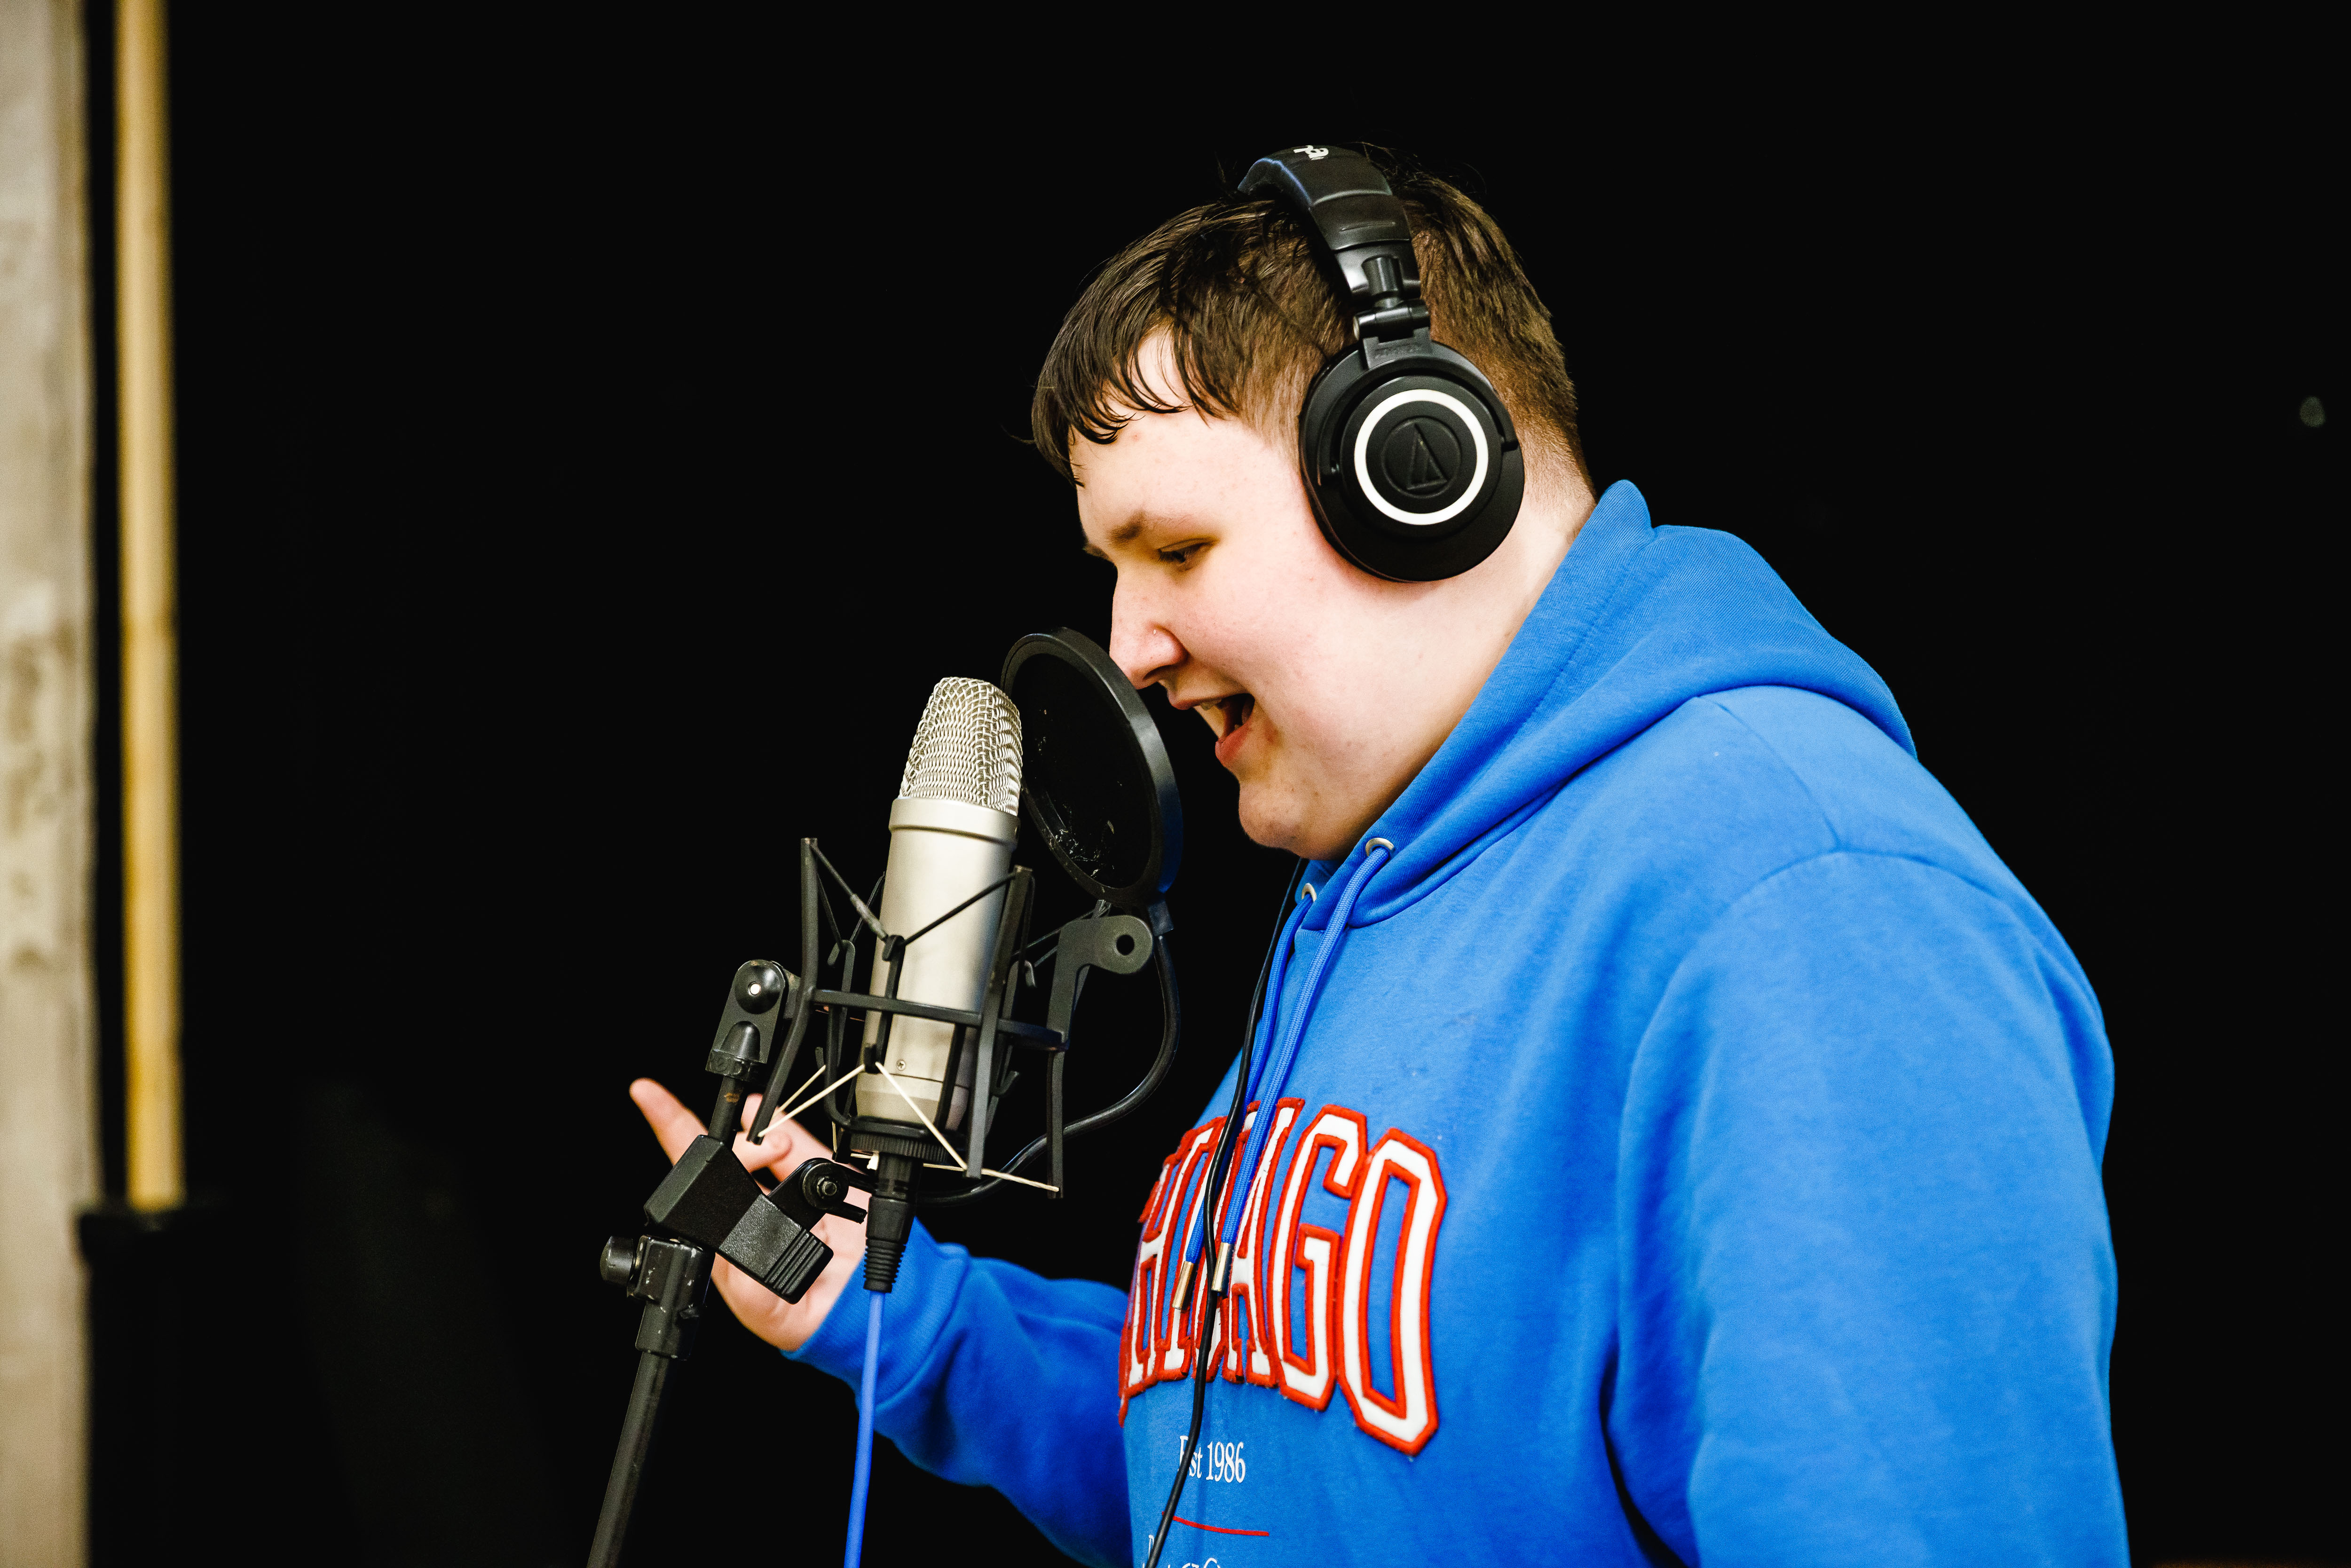 Young person in blue hoodie in front of a mic wearing headphones singing